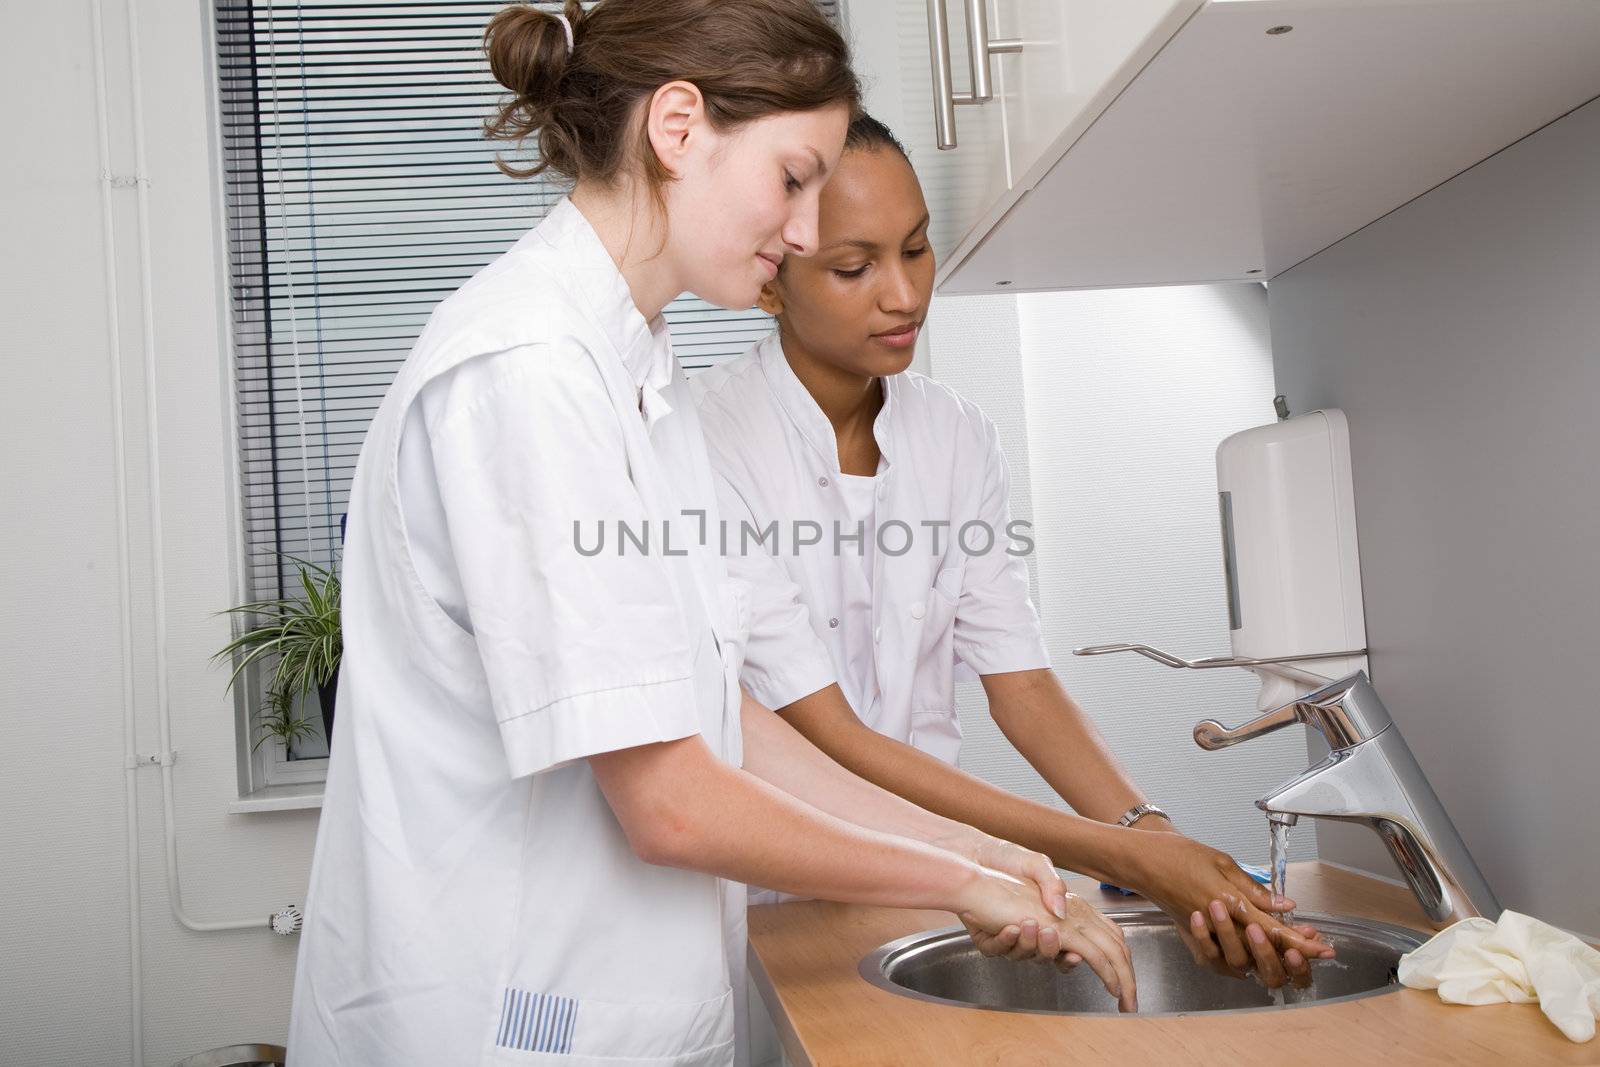 Two medical students washing their hands thoroughly